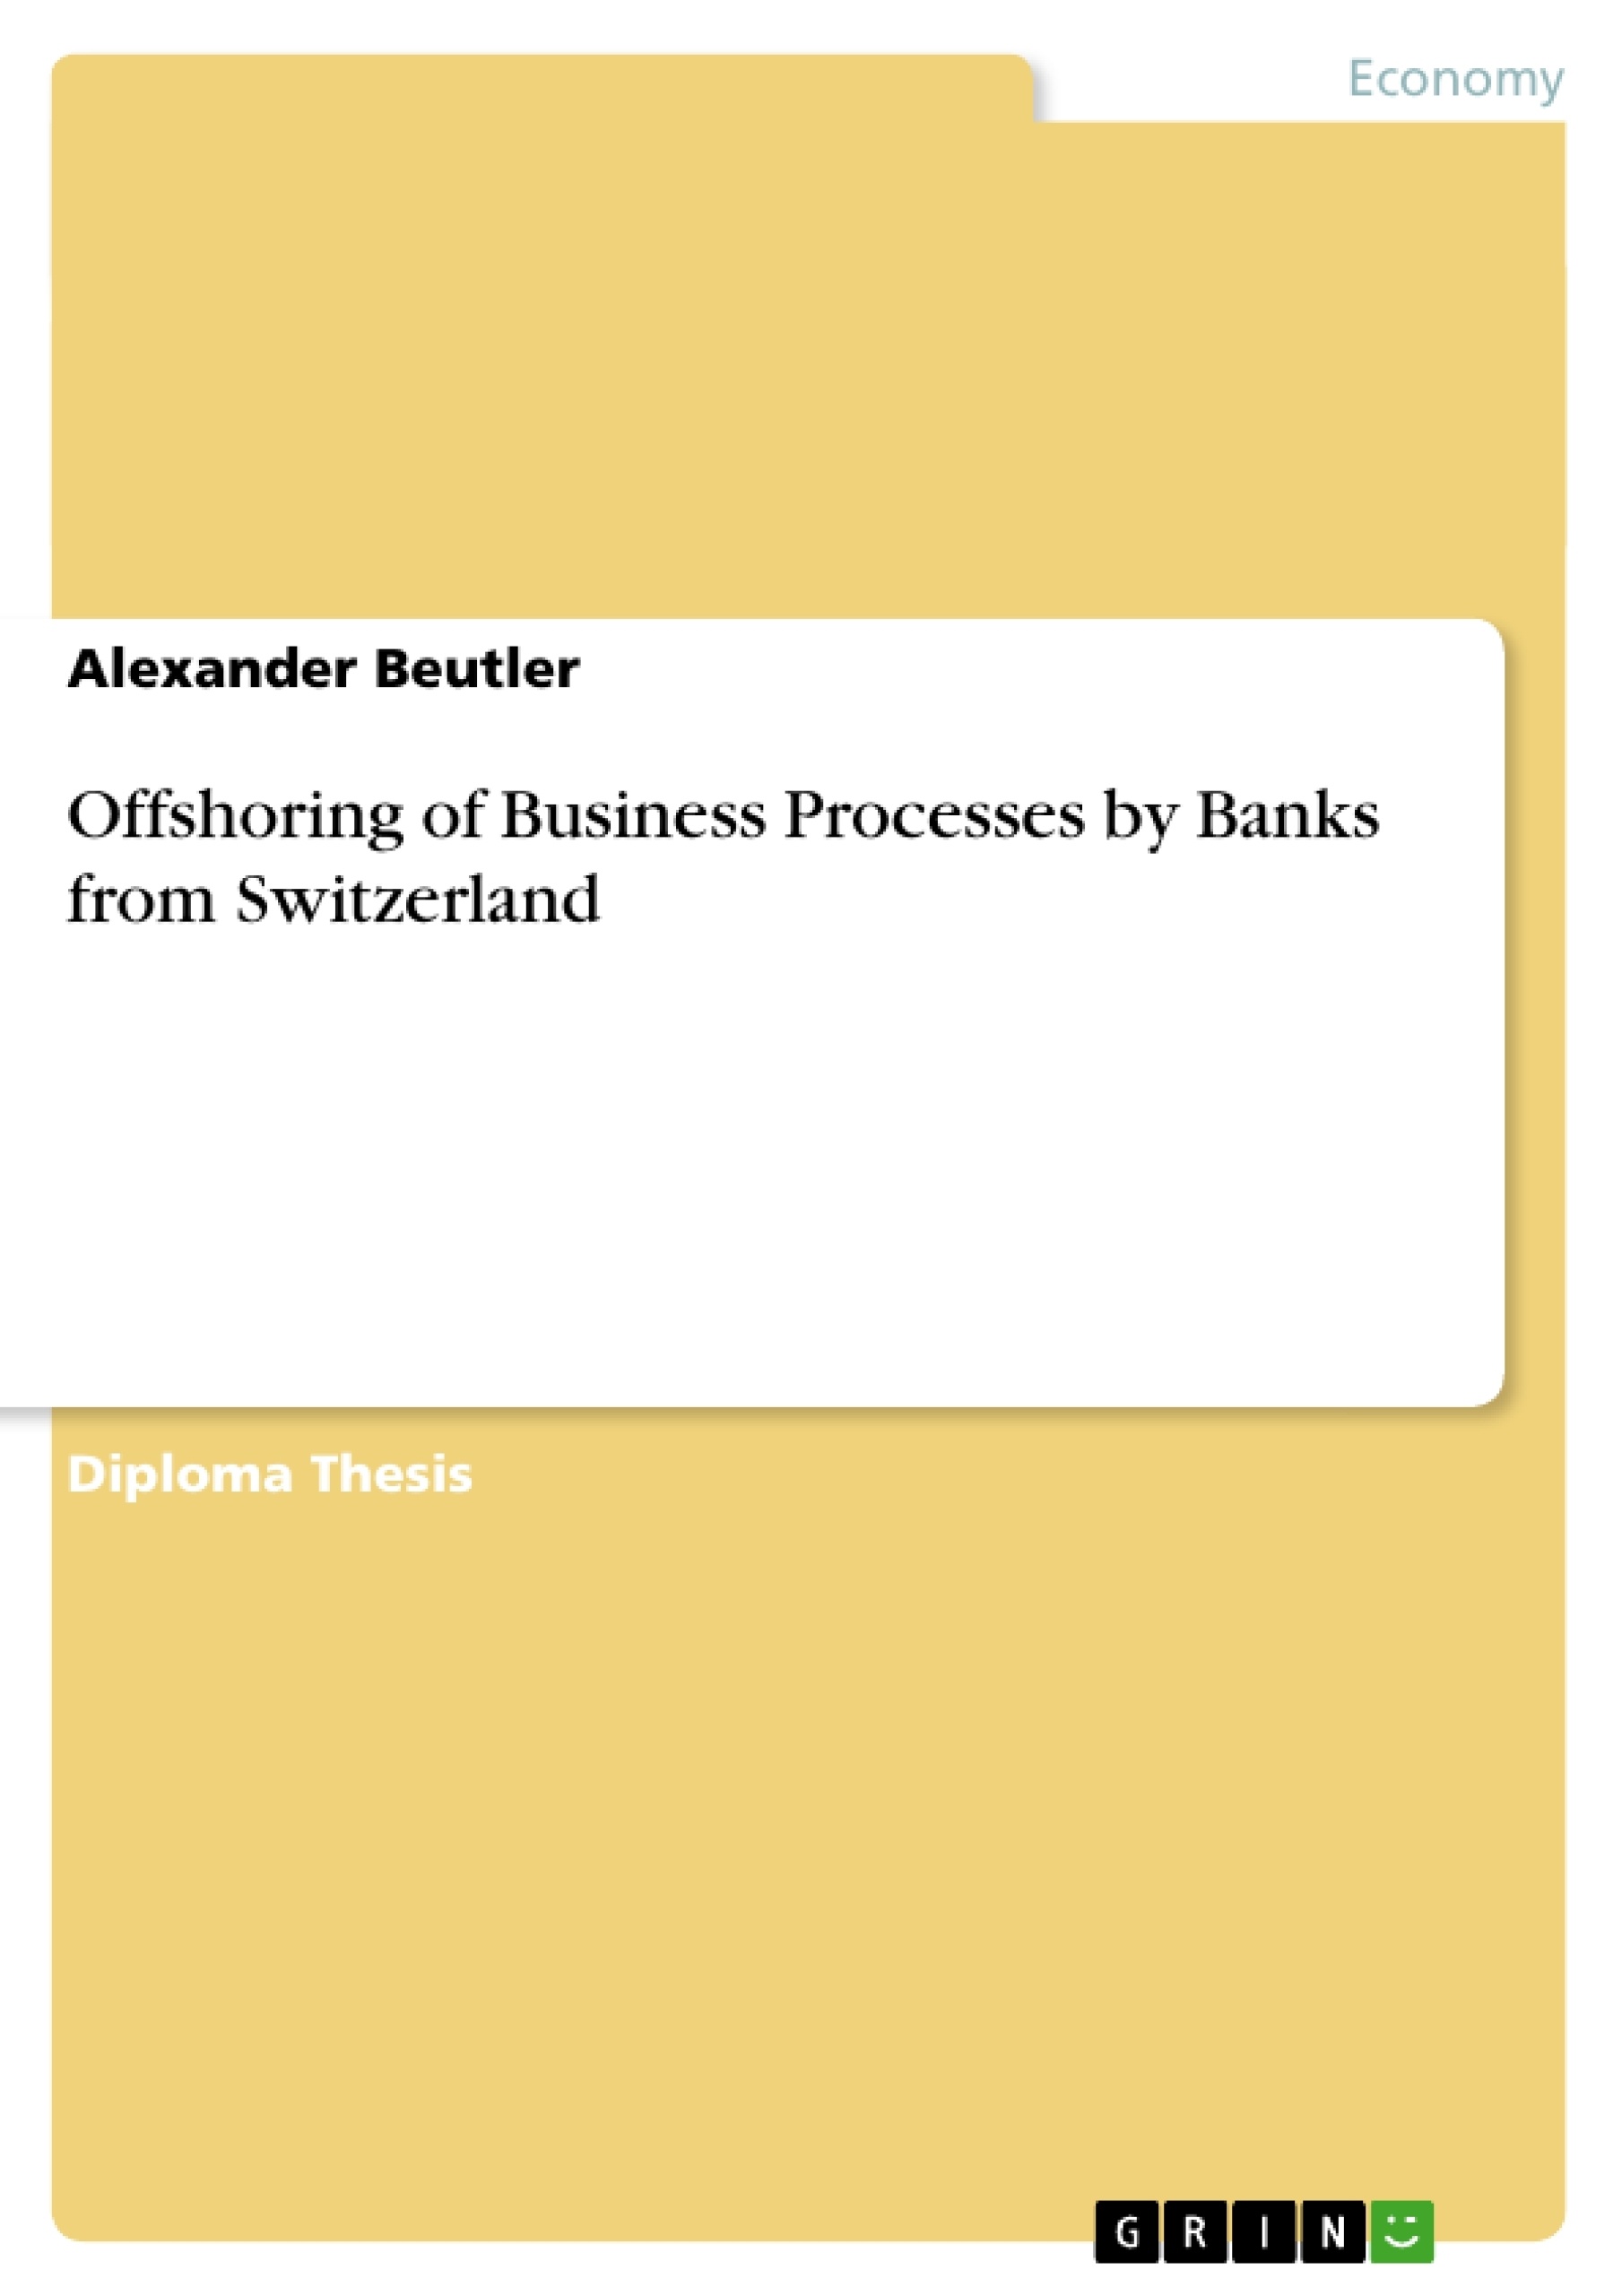 Título: Offshoring of Business Processes by Banks from Switzerland